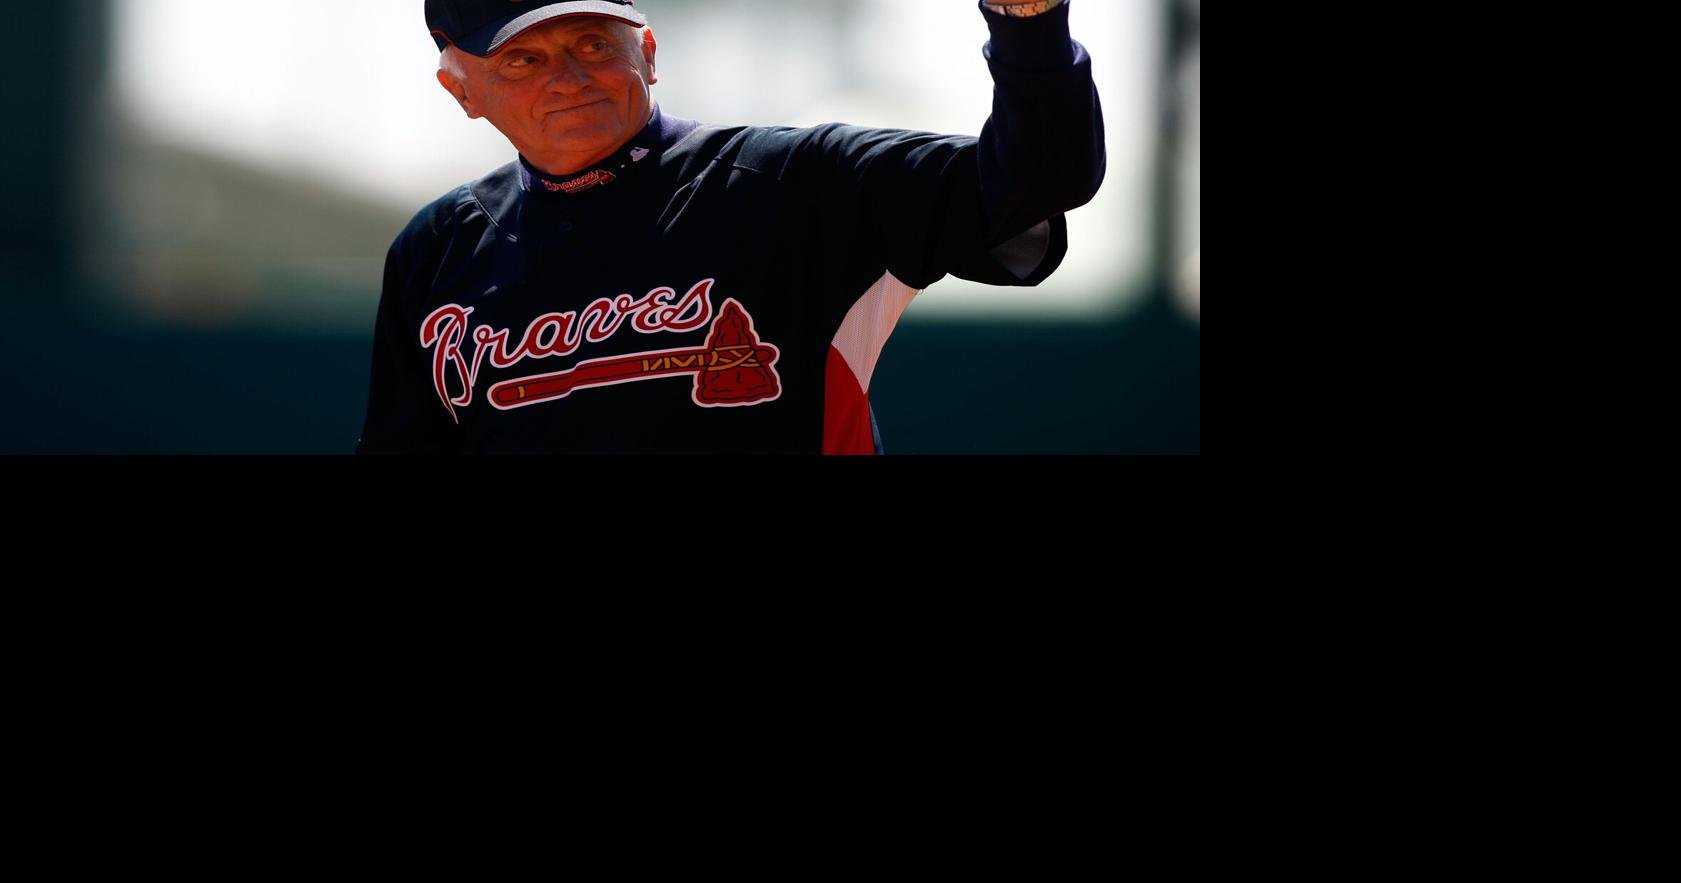 Braves pitching legend Phil Niekro turns 81 years old Wednesday